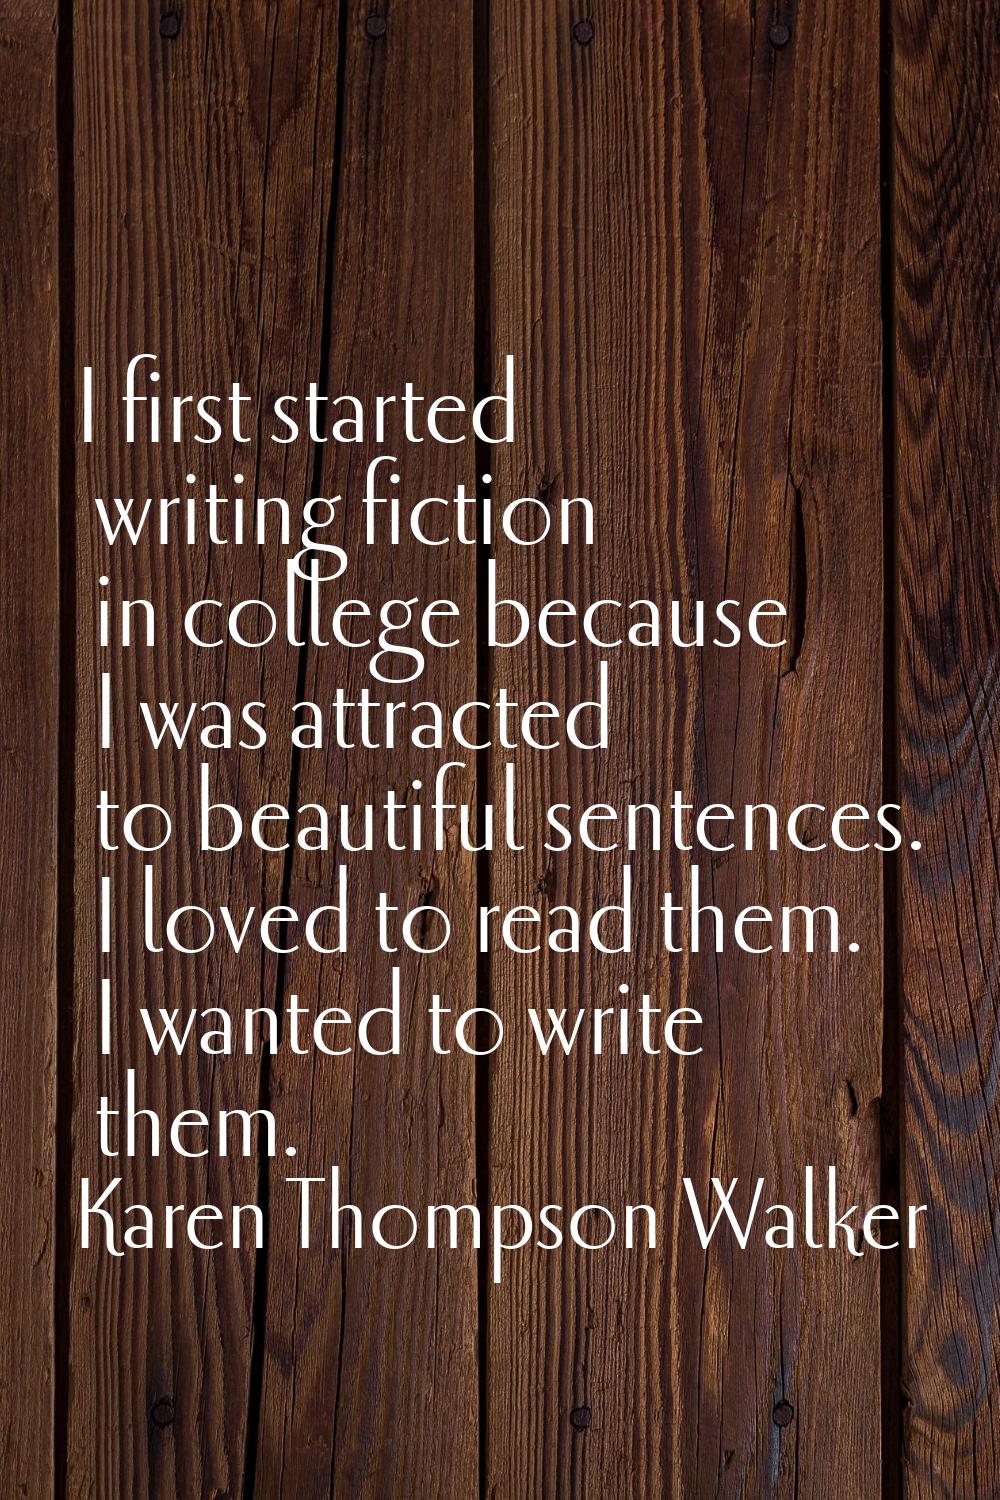 I first started writing fiction in college because I was attracted to beautiful sentences. I loved 